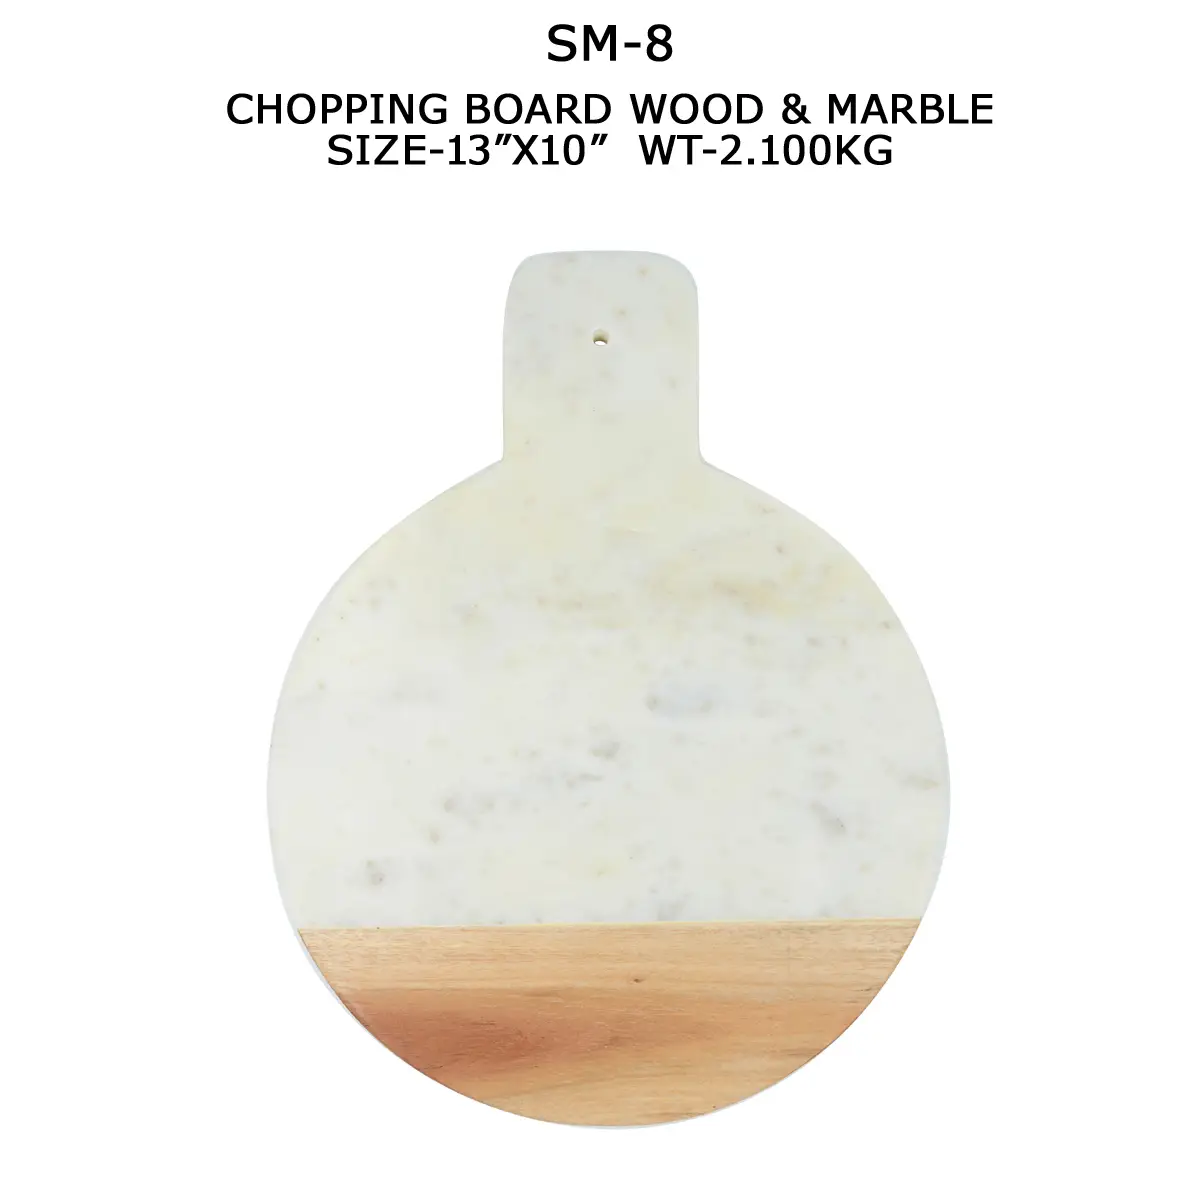 CHOPPING BOARD WITH HANDLE WOOD & WHITE MARBLE